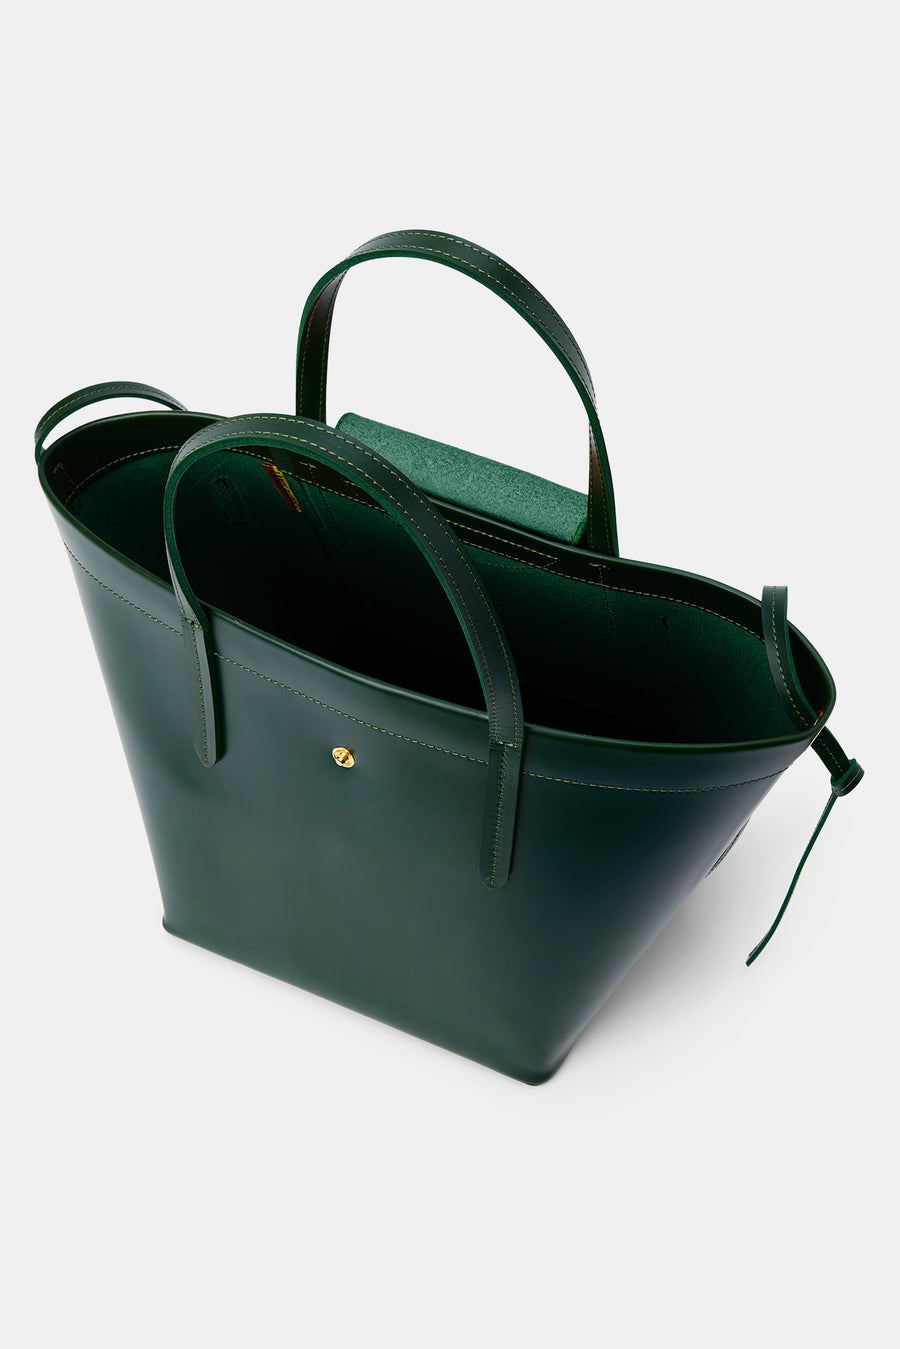 Lance Pierres Midiprism 01 Day Tote - Forest Green